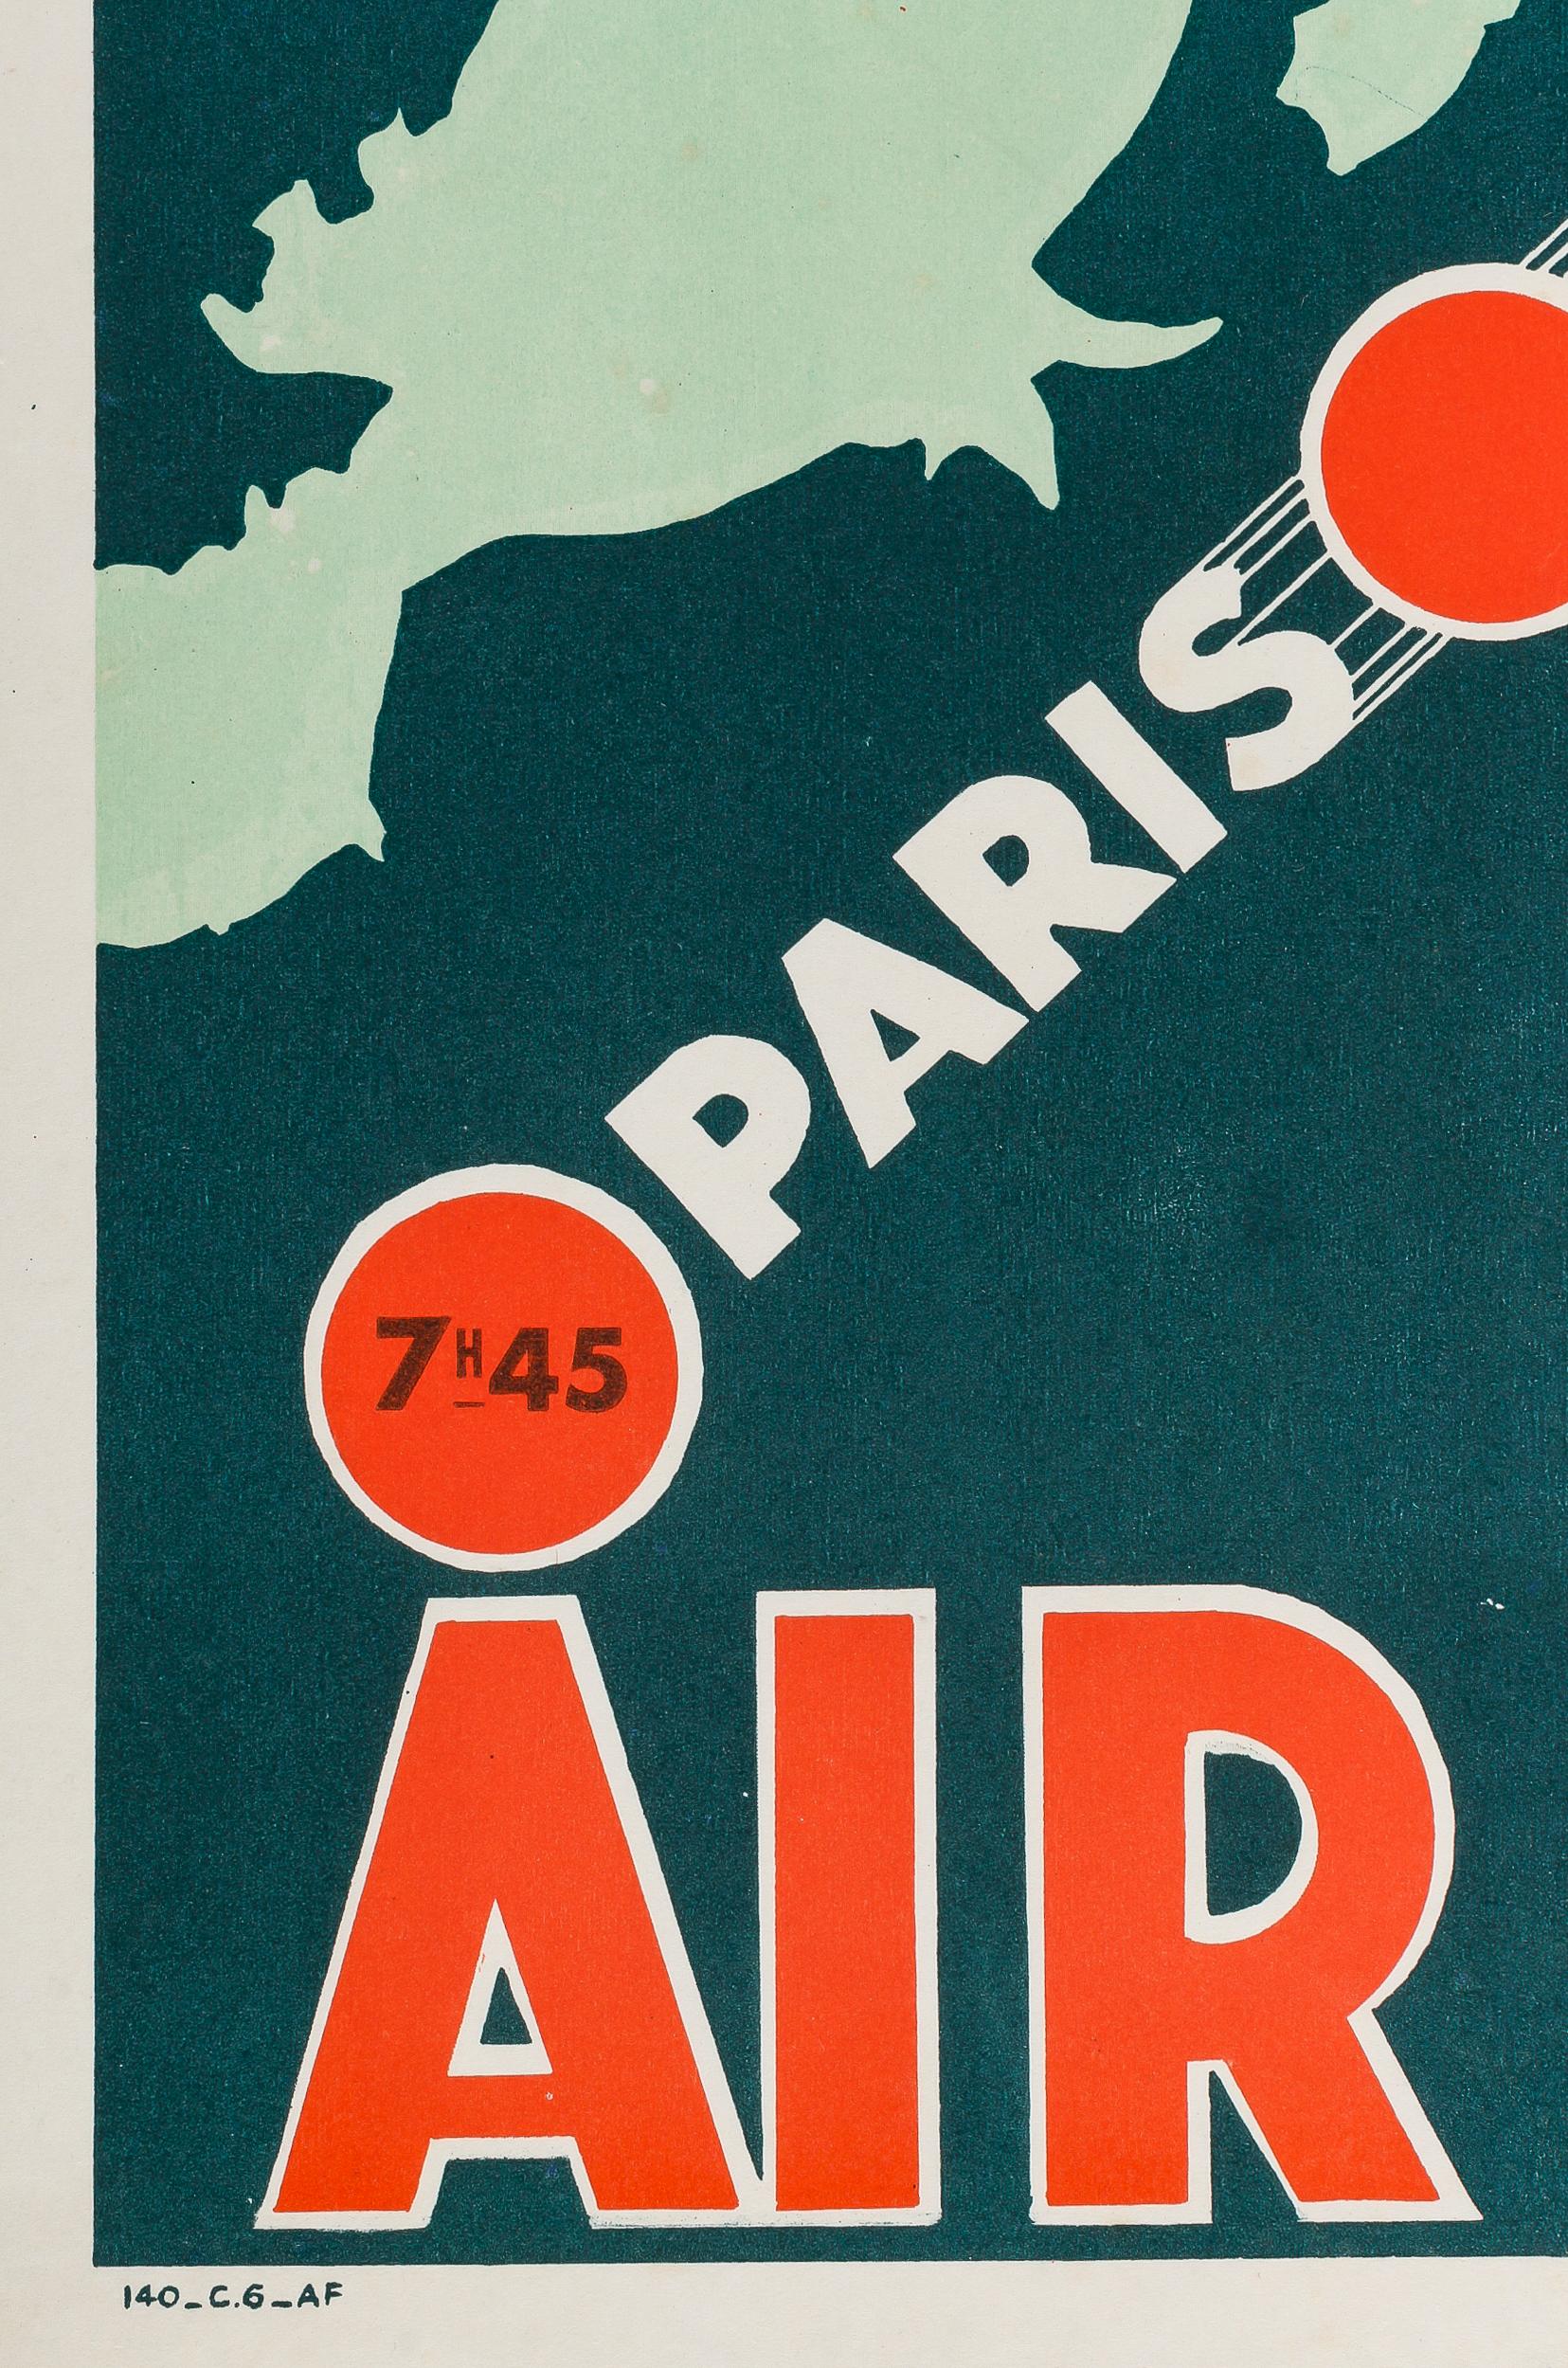 Air France poster created by Vinci in 1935 to promote tourism between Paris and Northern Europe.

Artist: Vinci
Title:  Air France – Paris - Stockholm
Date: 1935
Size: 12 x 19.8 in. / 30.5 x 50.3 cm
Printer: Alepée et Cie - Paris
Materials and